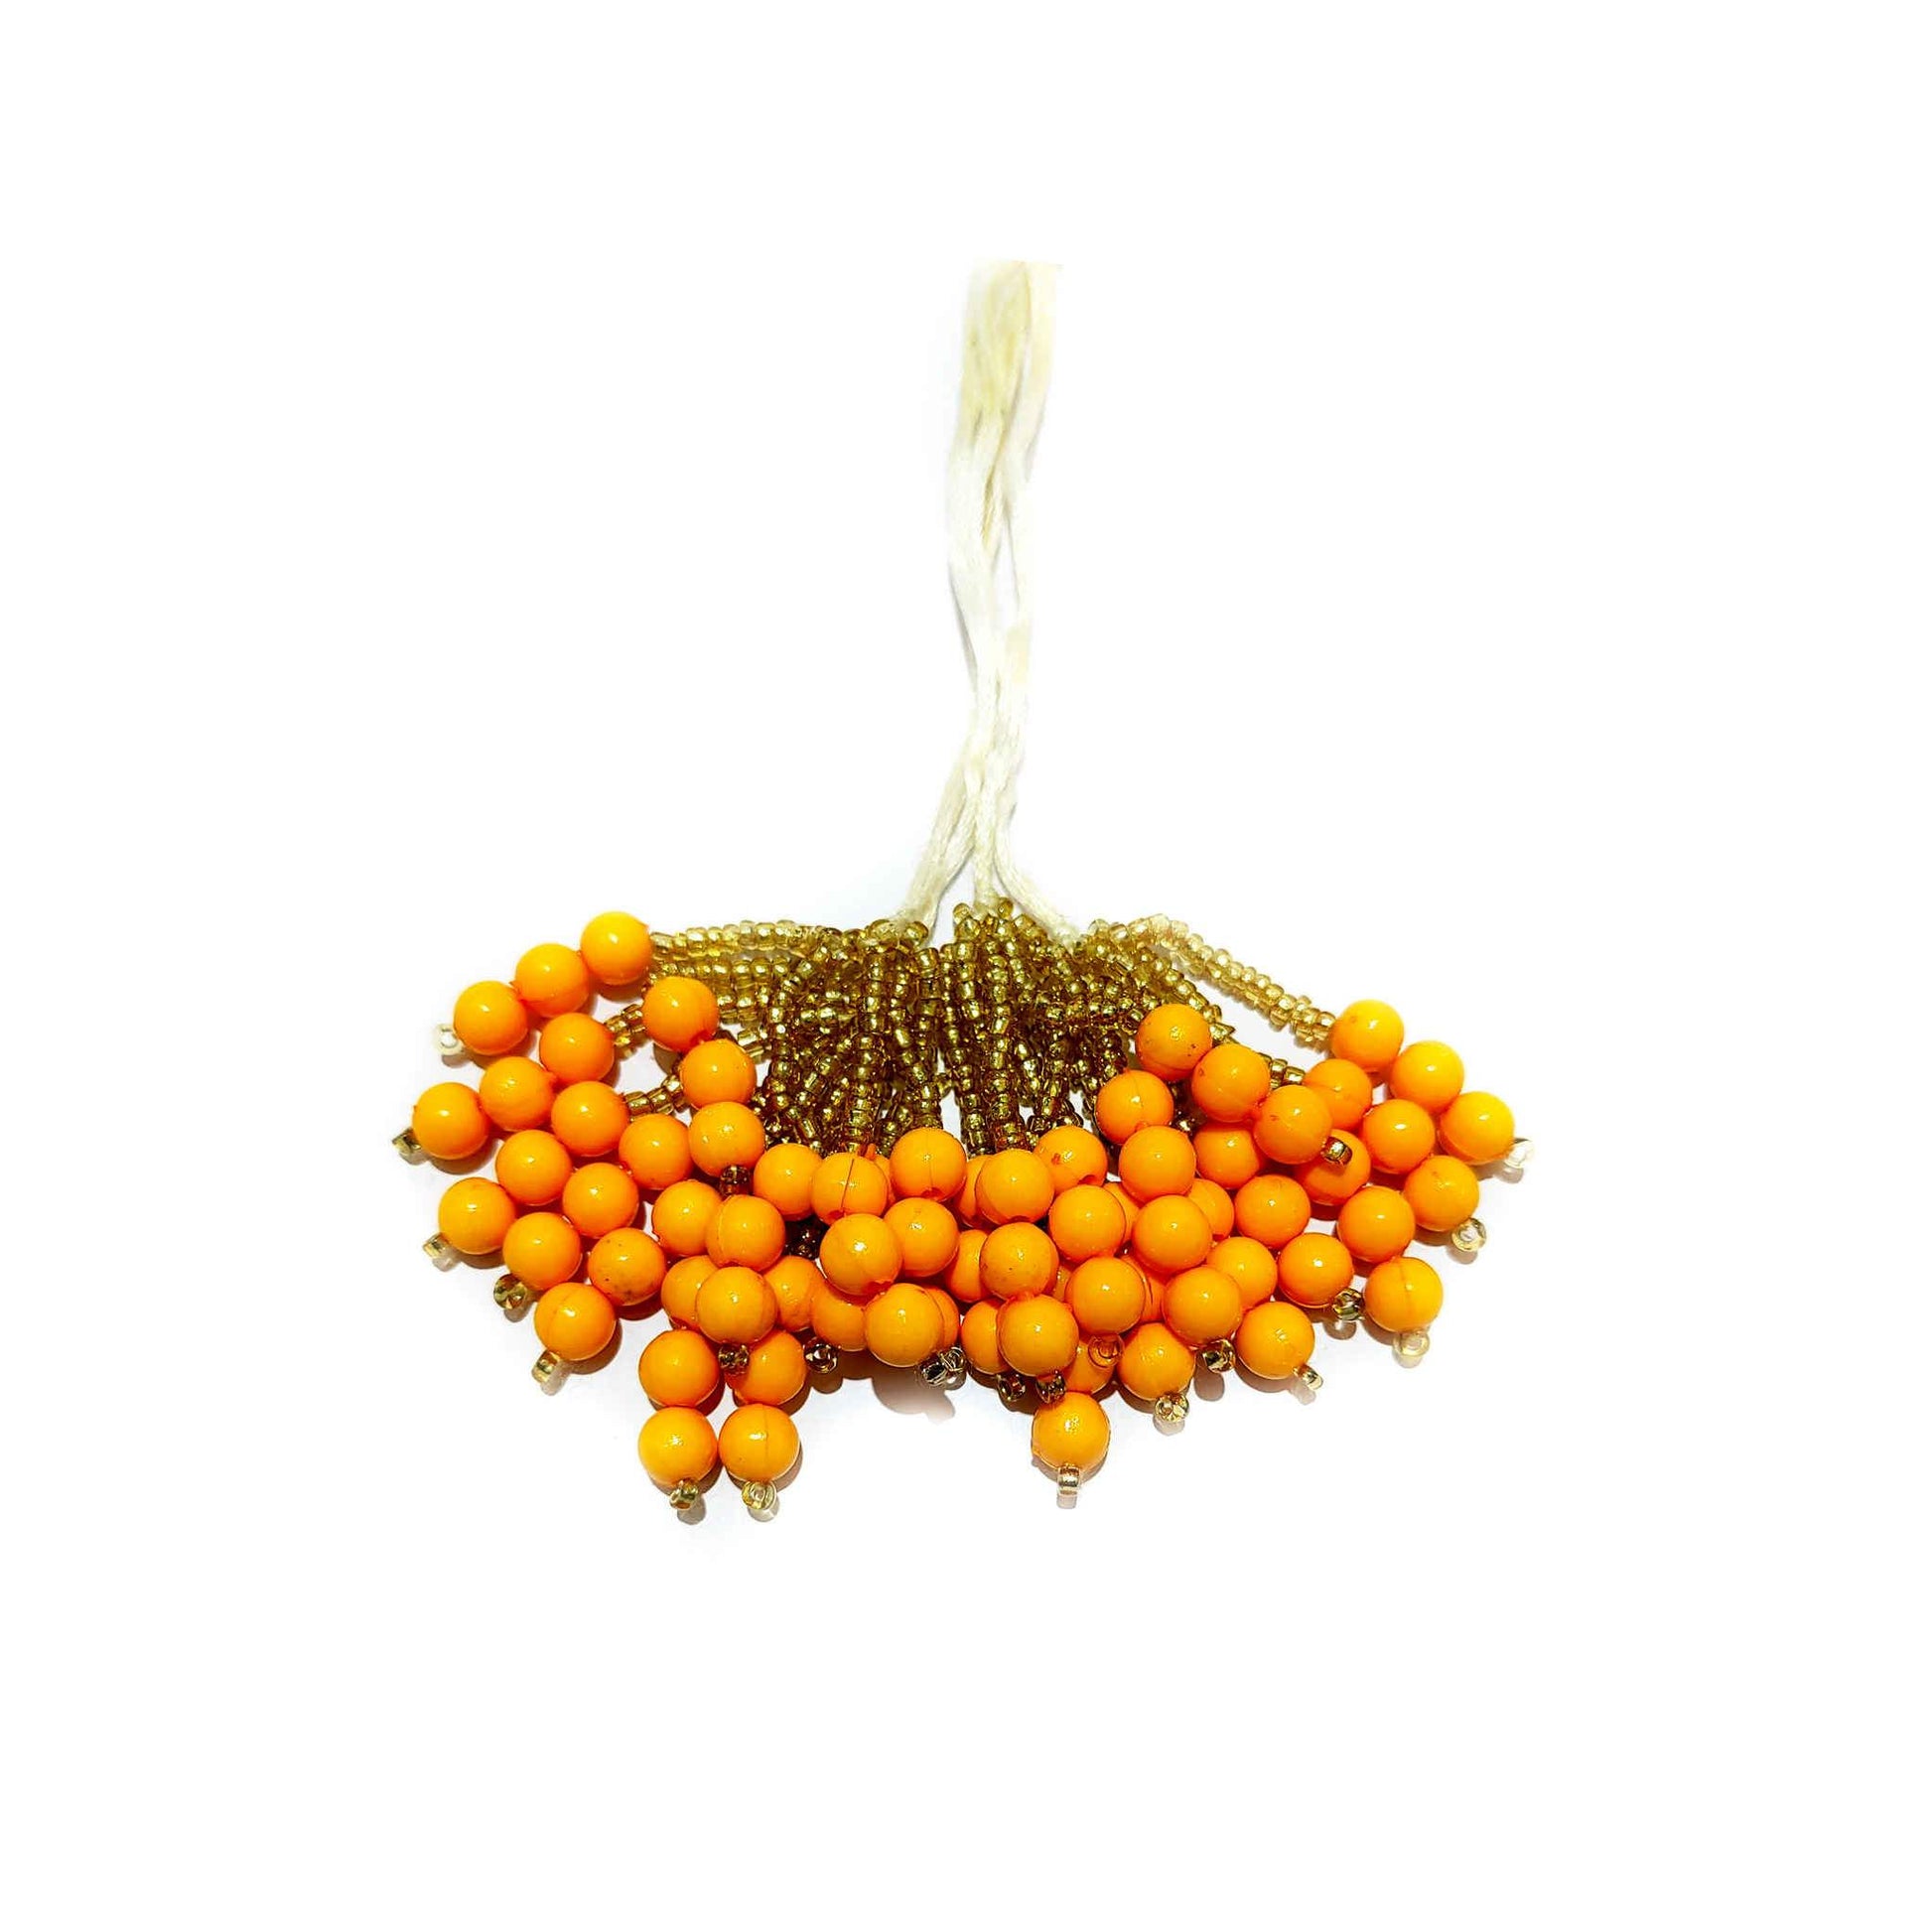 Indian Petals Handmade Beaded Thread Fringe Tassel with Cheed for Craft, Jewelry or Dressing - Design 845, Yellow